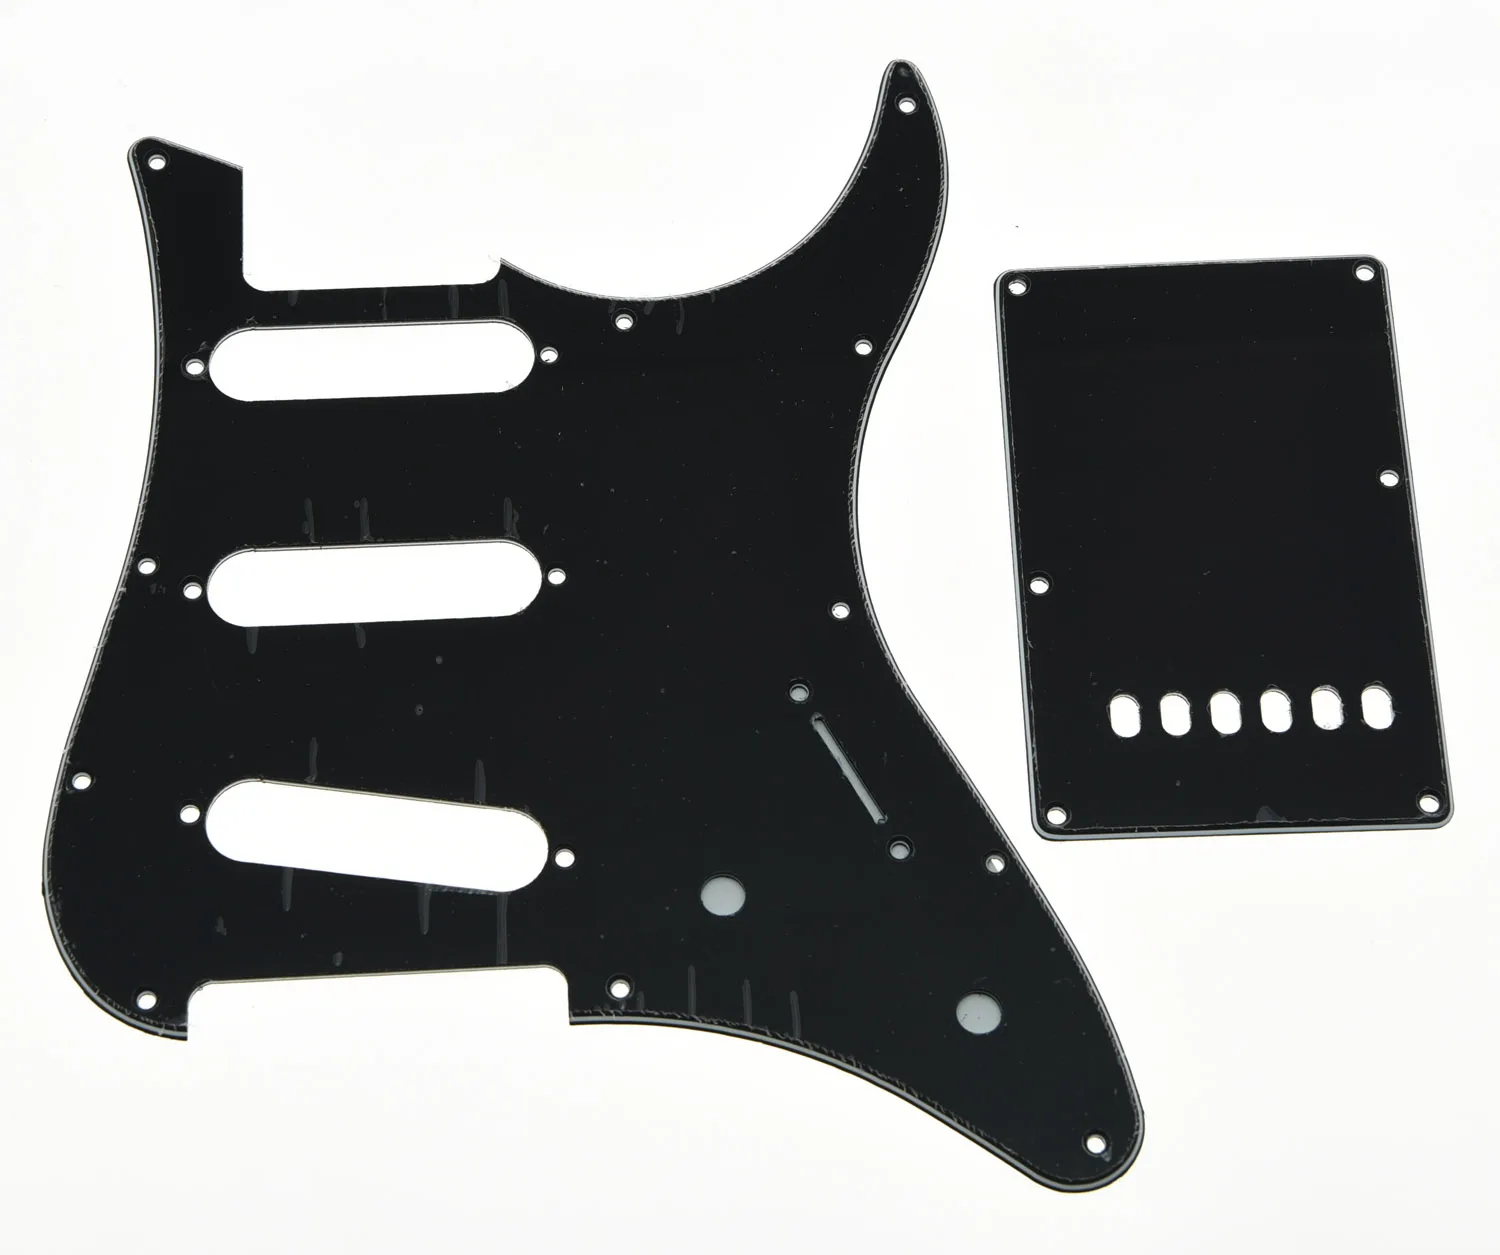 Black 3 Ply Guitar SSS Pickguard w/ Back Plate Screws for Yamaha PACIFICA